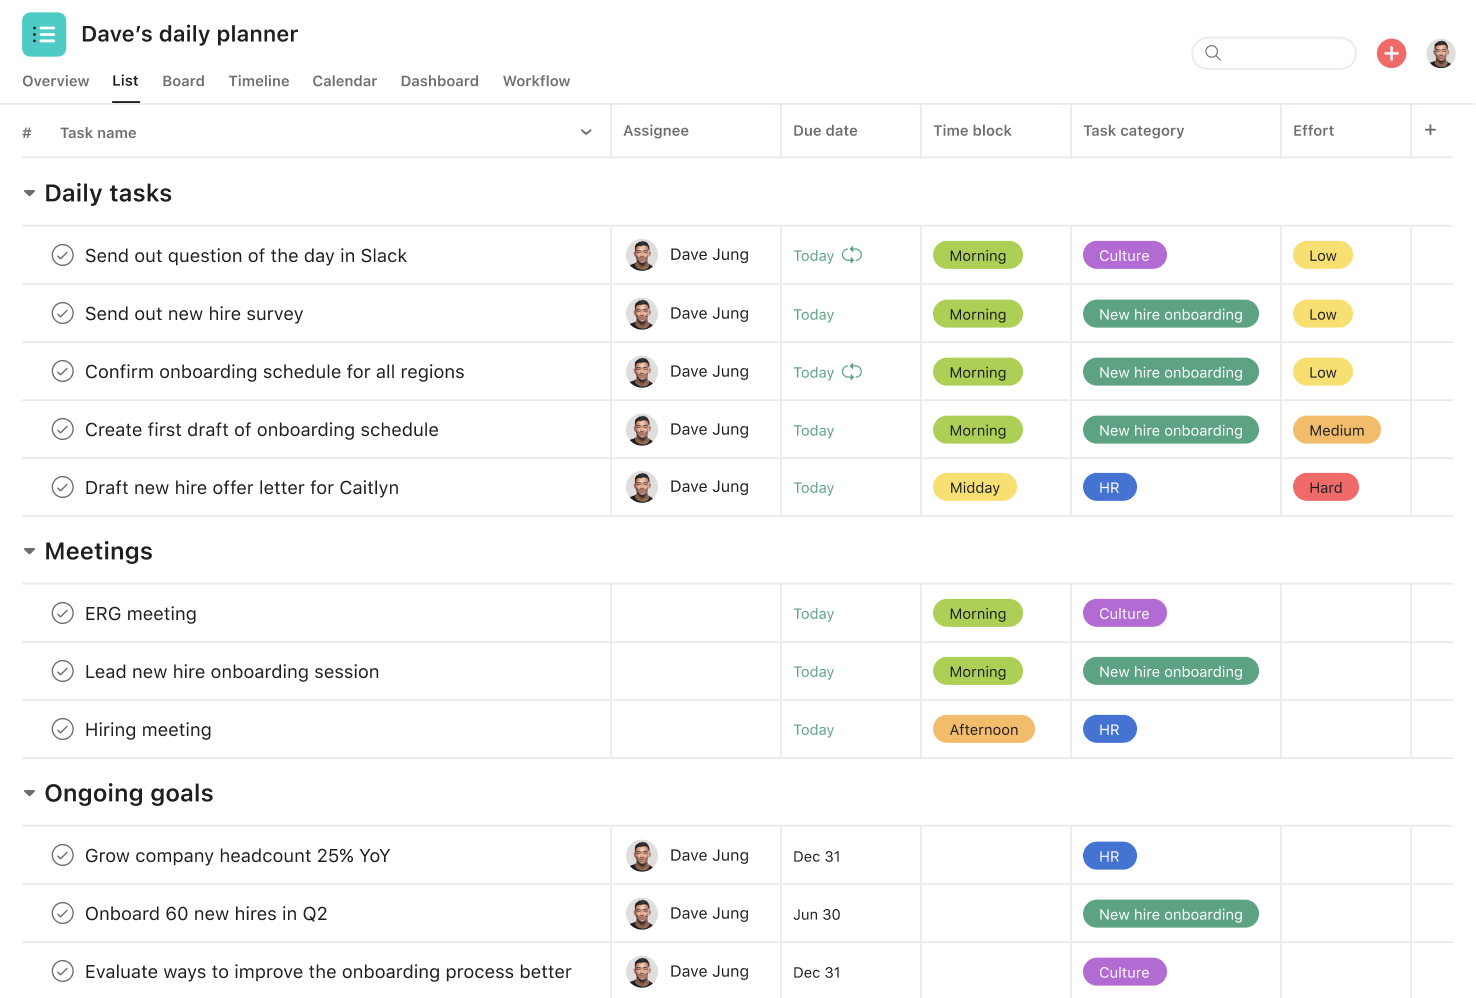 [Product ui] Dave's Daily planner project template in Asana (list view)